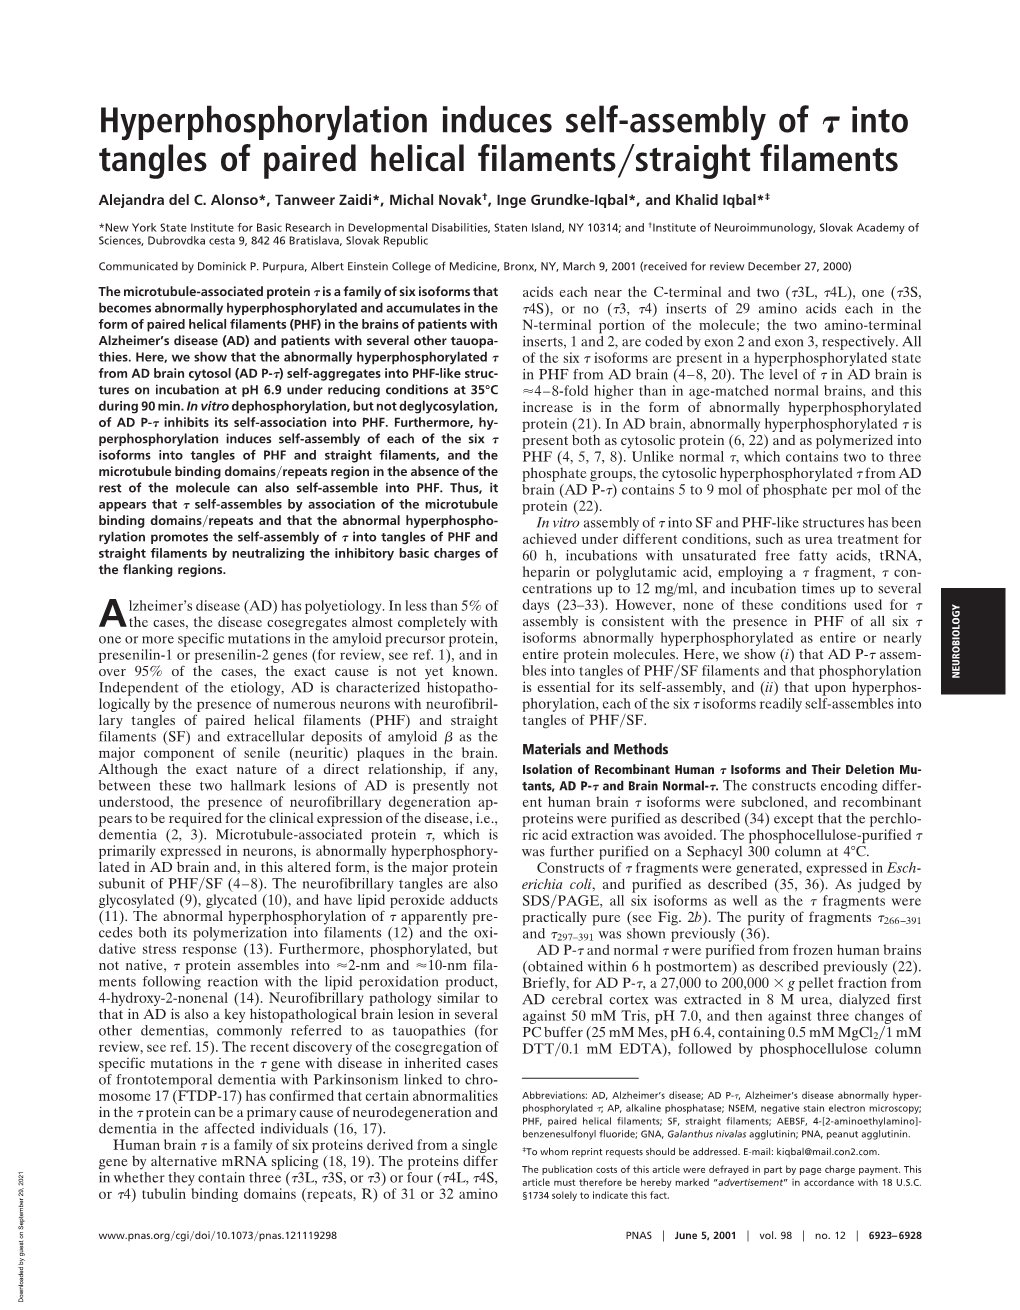 Hyperphosphorylation Induces Self-Assembly of Into Tangles of Paired Helical Filaments Straight Filaments